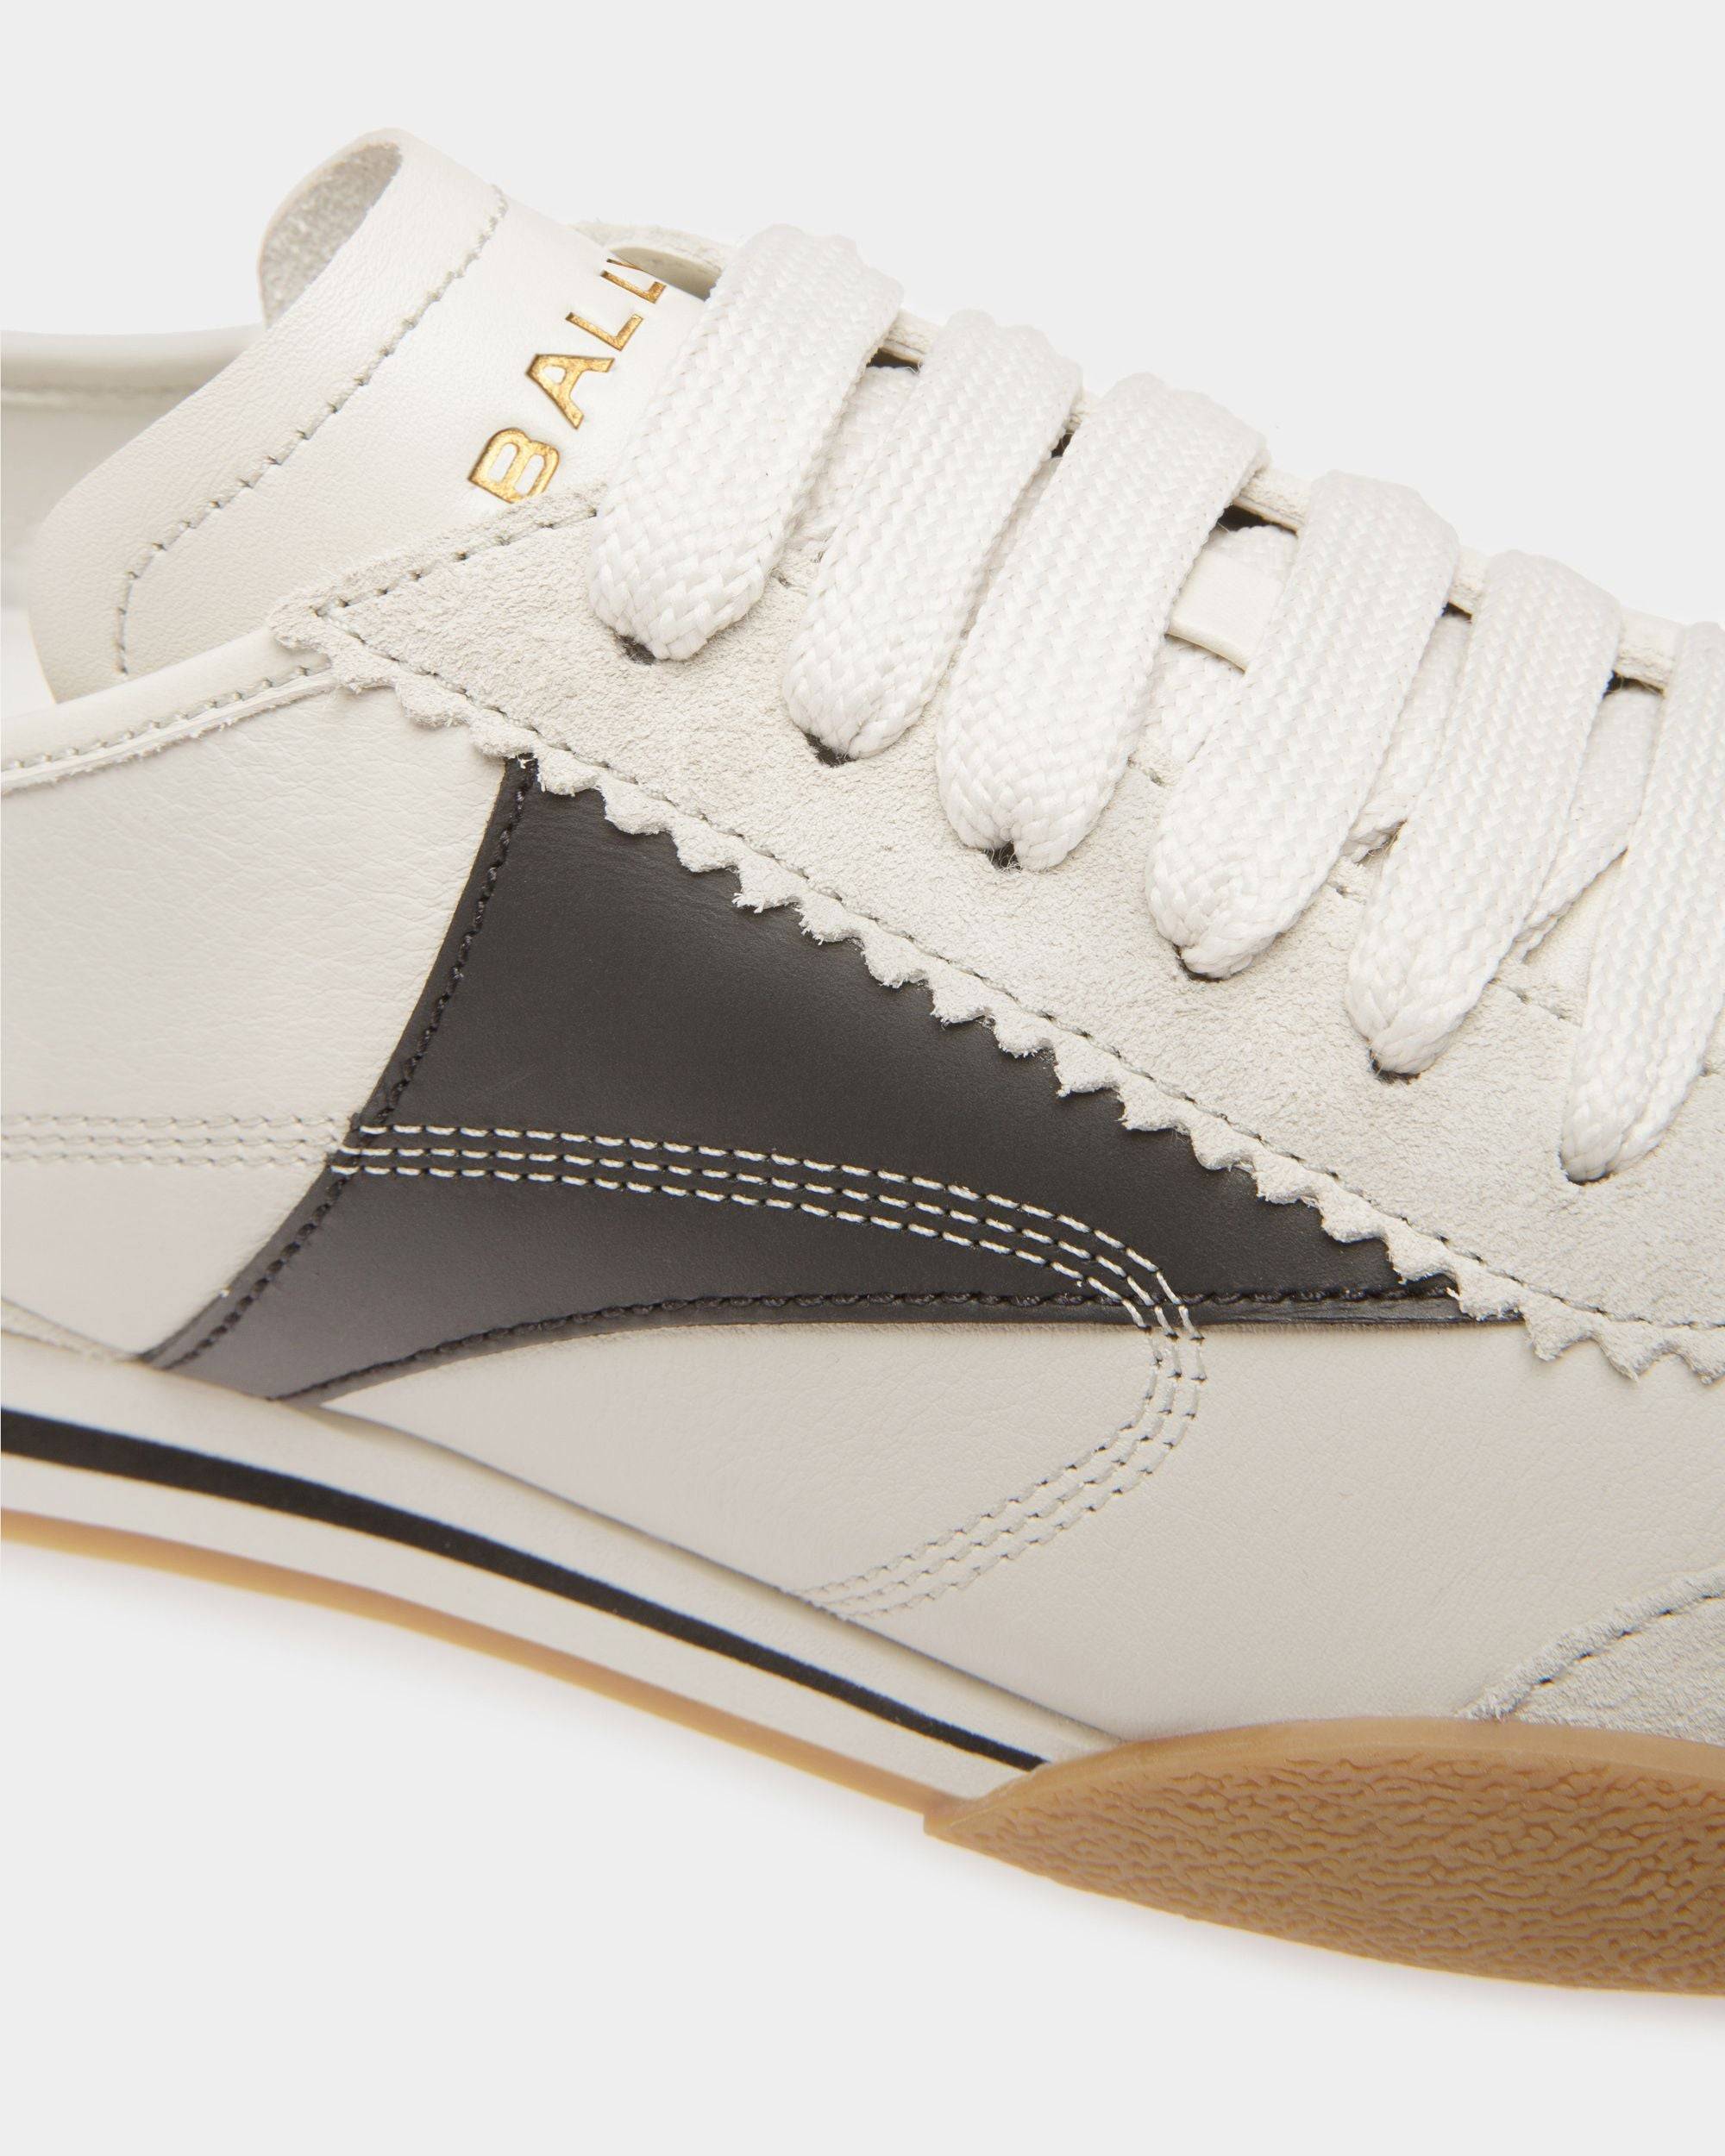 Sonney | Women's Sneakers | Dusty White And Black Leather | Bally | Still Life Detail